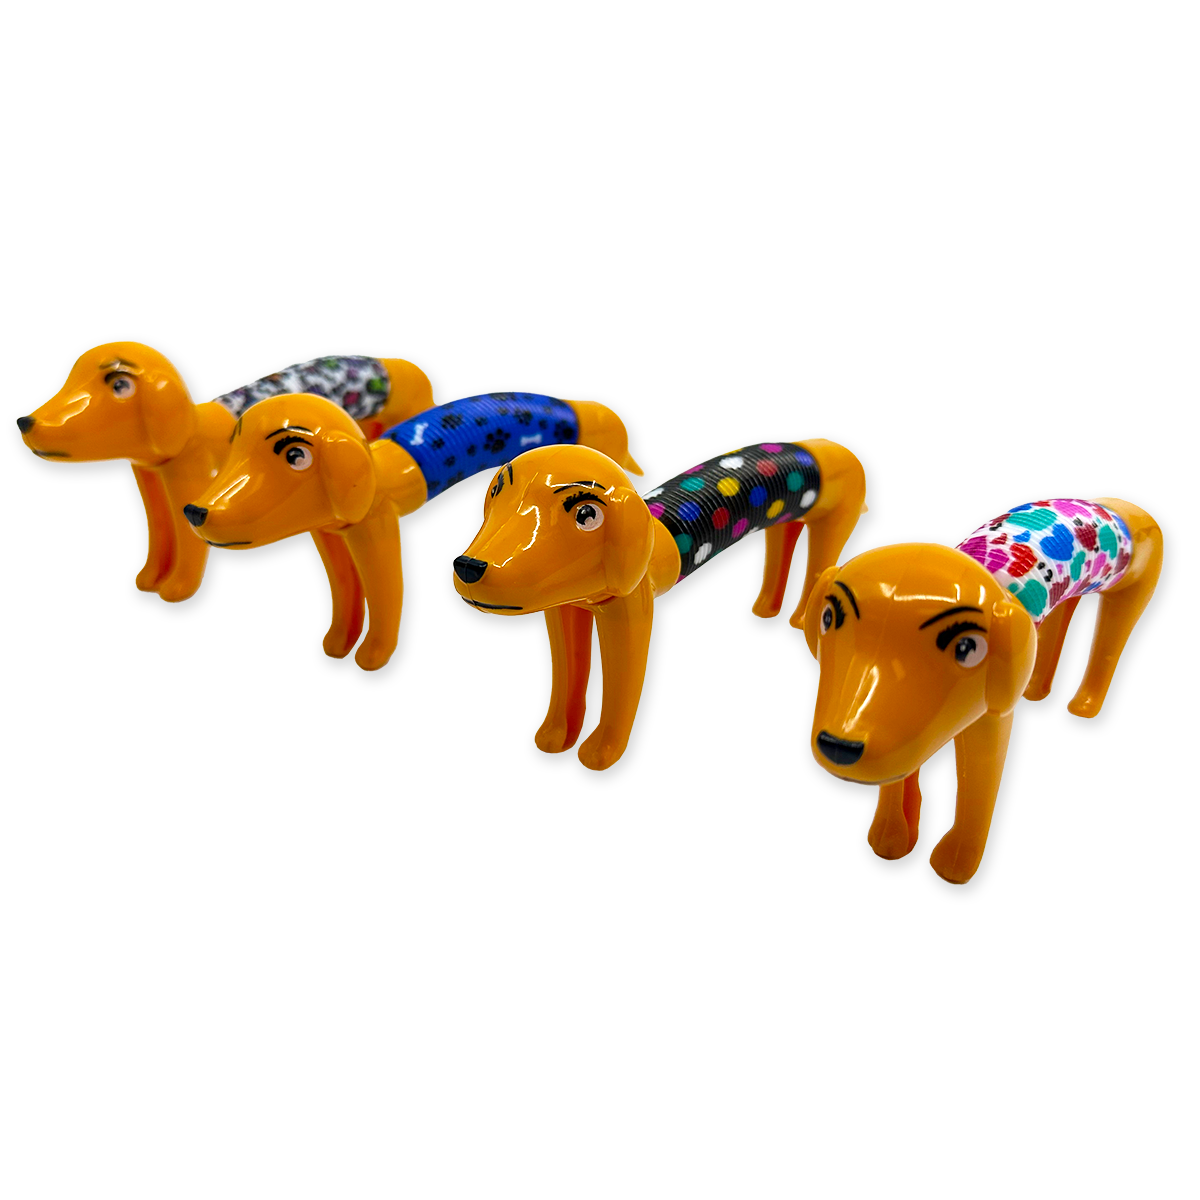 ITEM NUMBER 023357 BENDY FIDGET TUBE DOGS 12 PIECES PER PACK